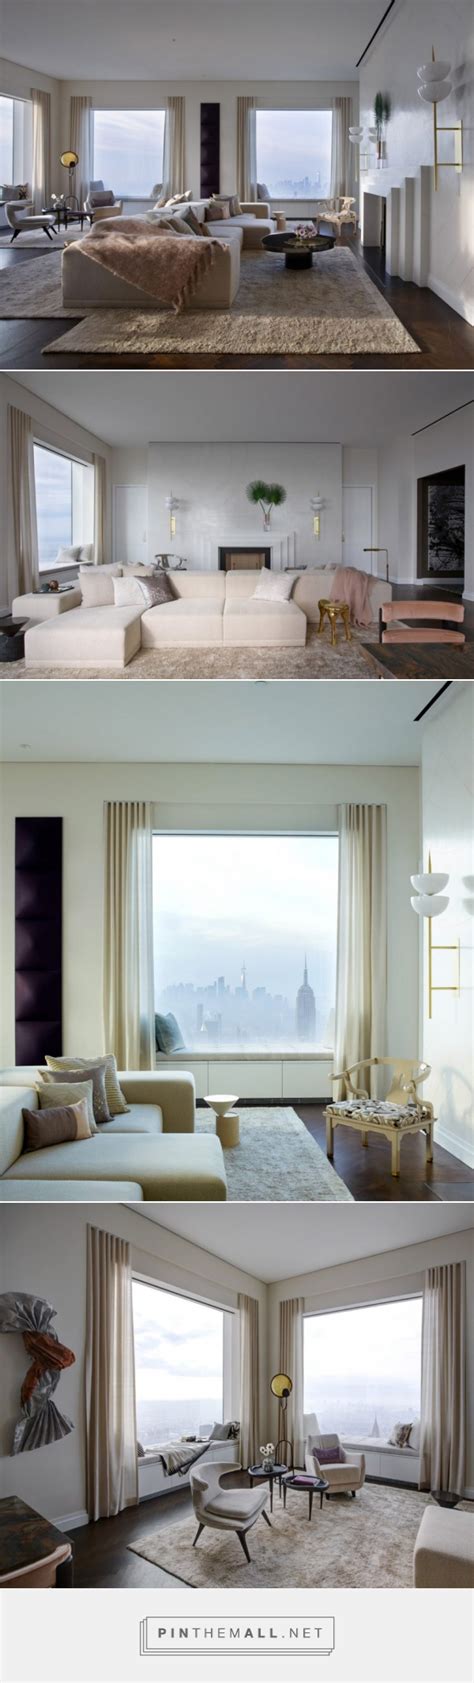 432 Park Avenue Penthouse Receives Makeover From Kelly Behun 432 Park